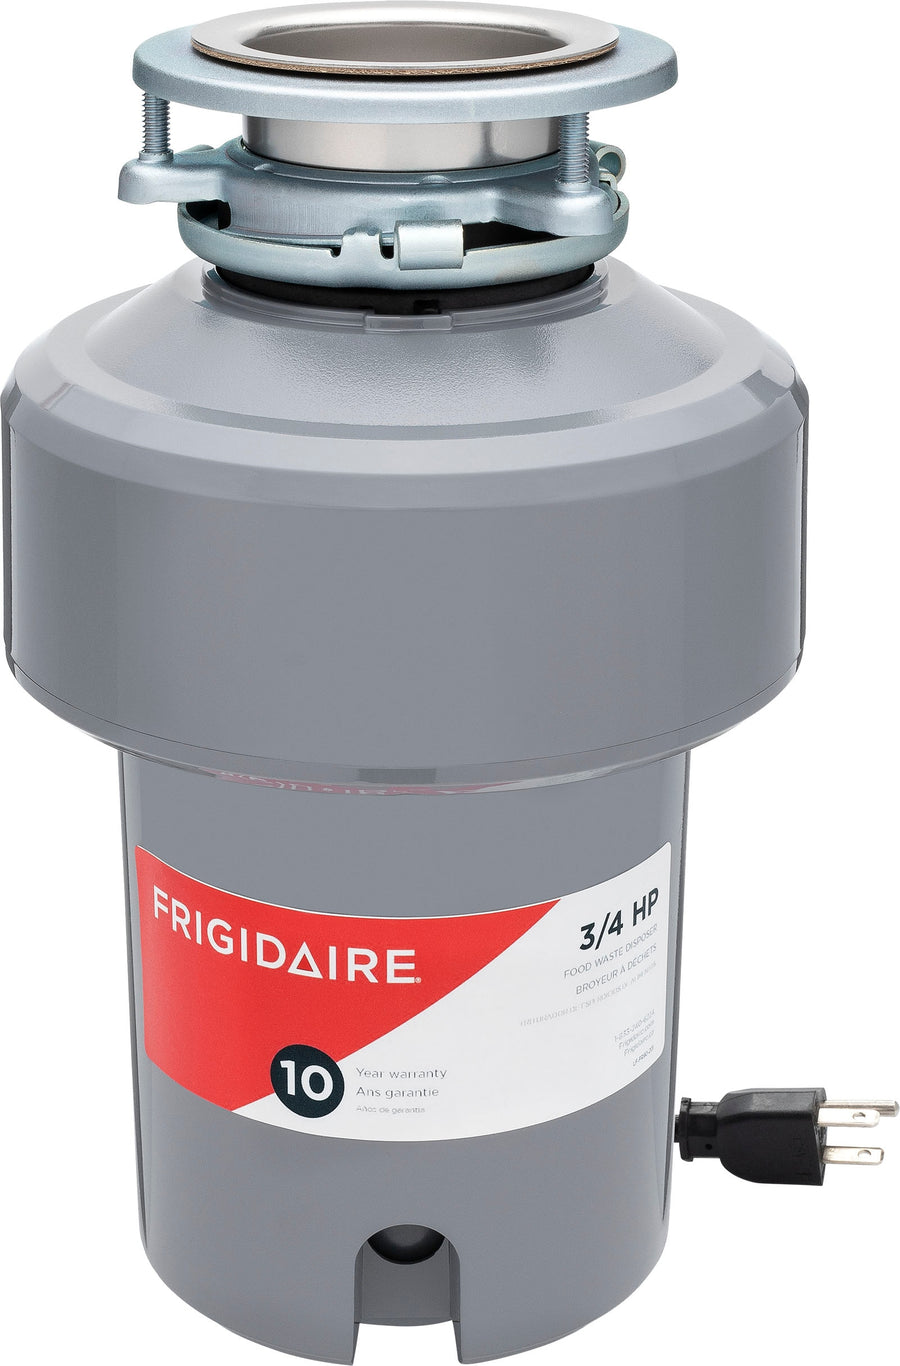 Frigidaire 3/4HP Corded Garbage Disposal - Gray_0